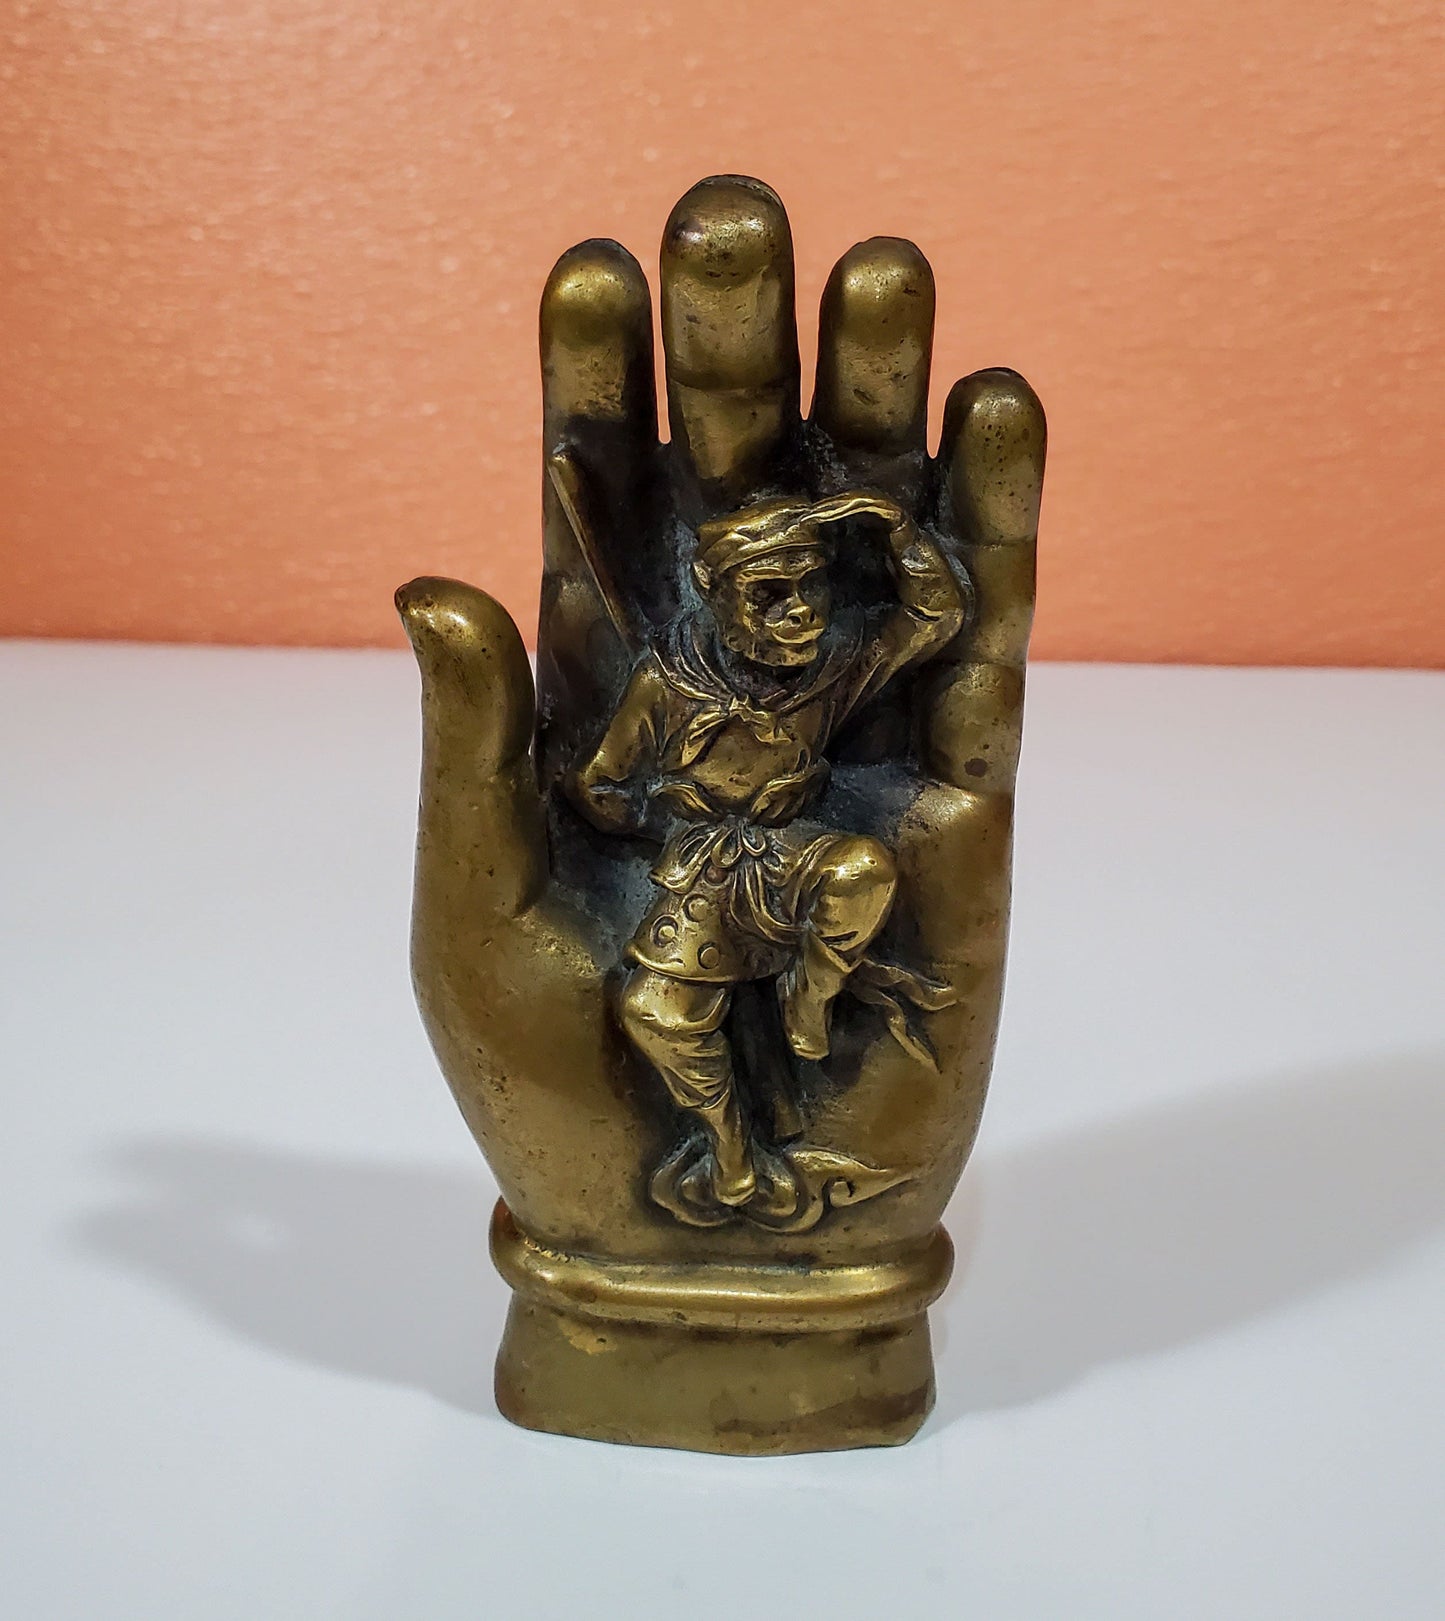 5.5" Vintage Chinese Brass Sun WuKong Handsome Monkey King In Buddha Hand Statue